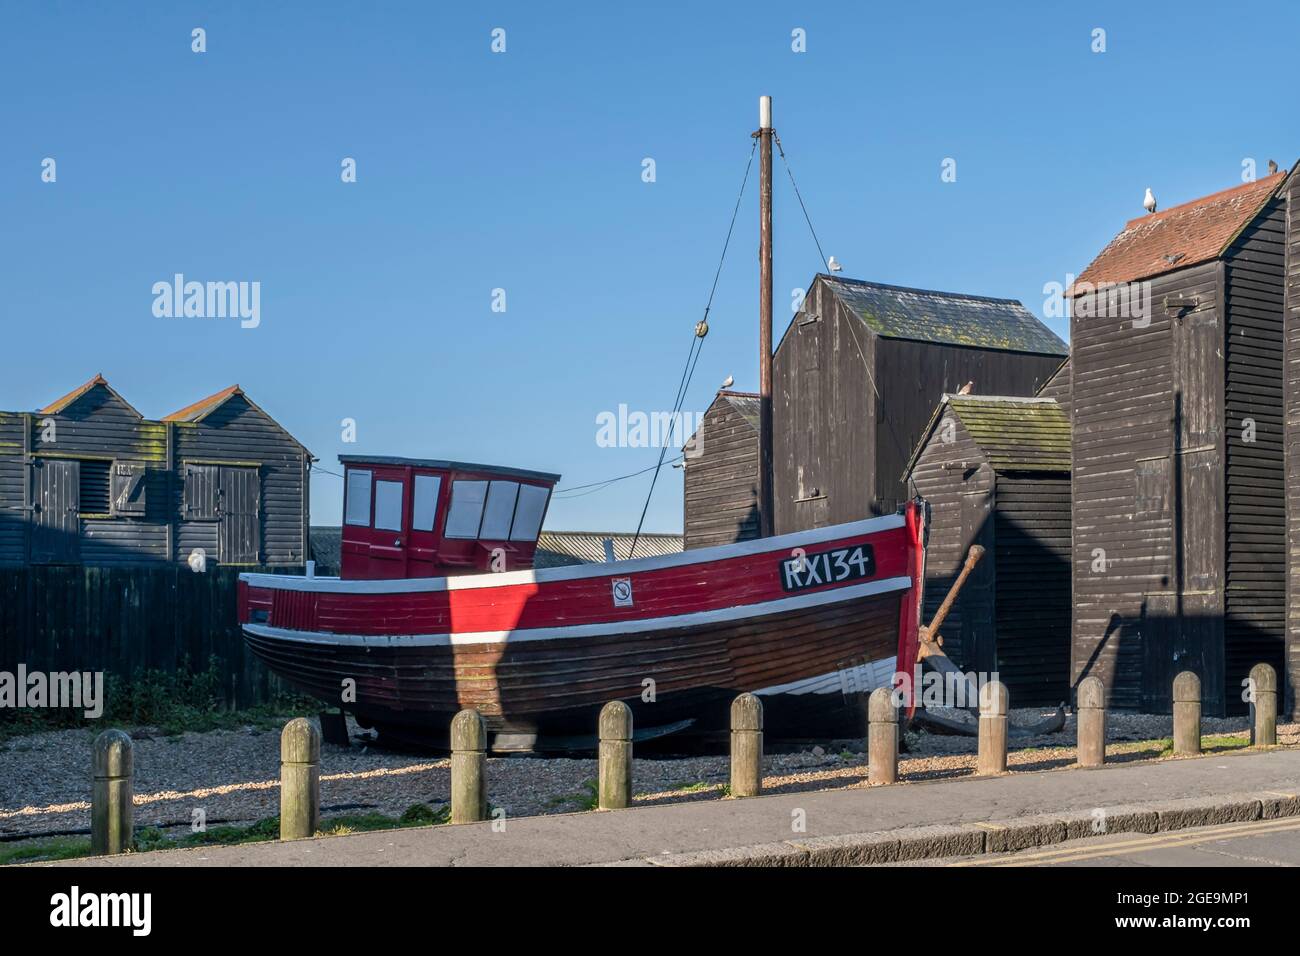 An old fishing boat amid the Net Shops on Hastings heritage trail. Stock Photo